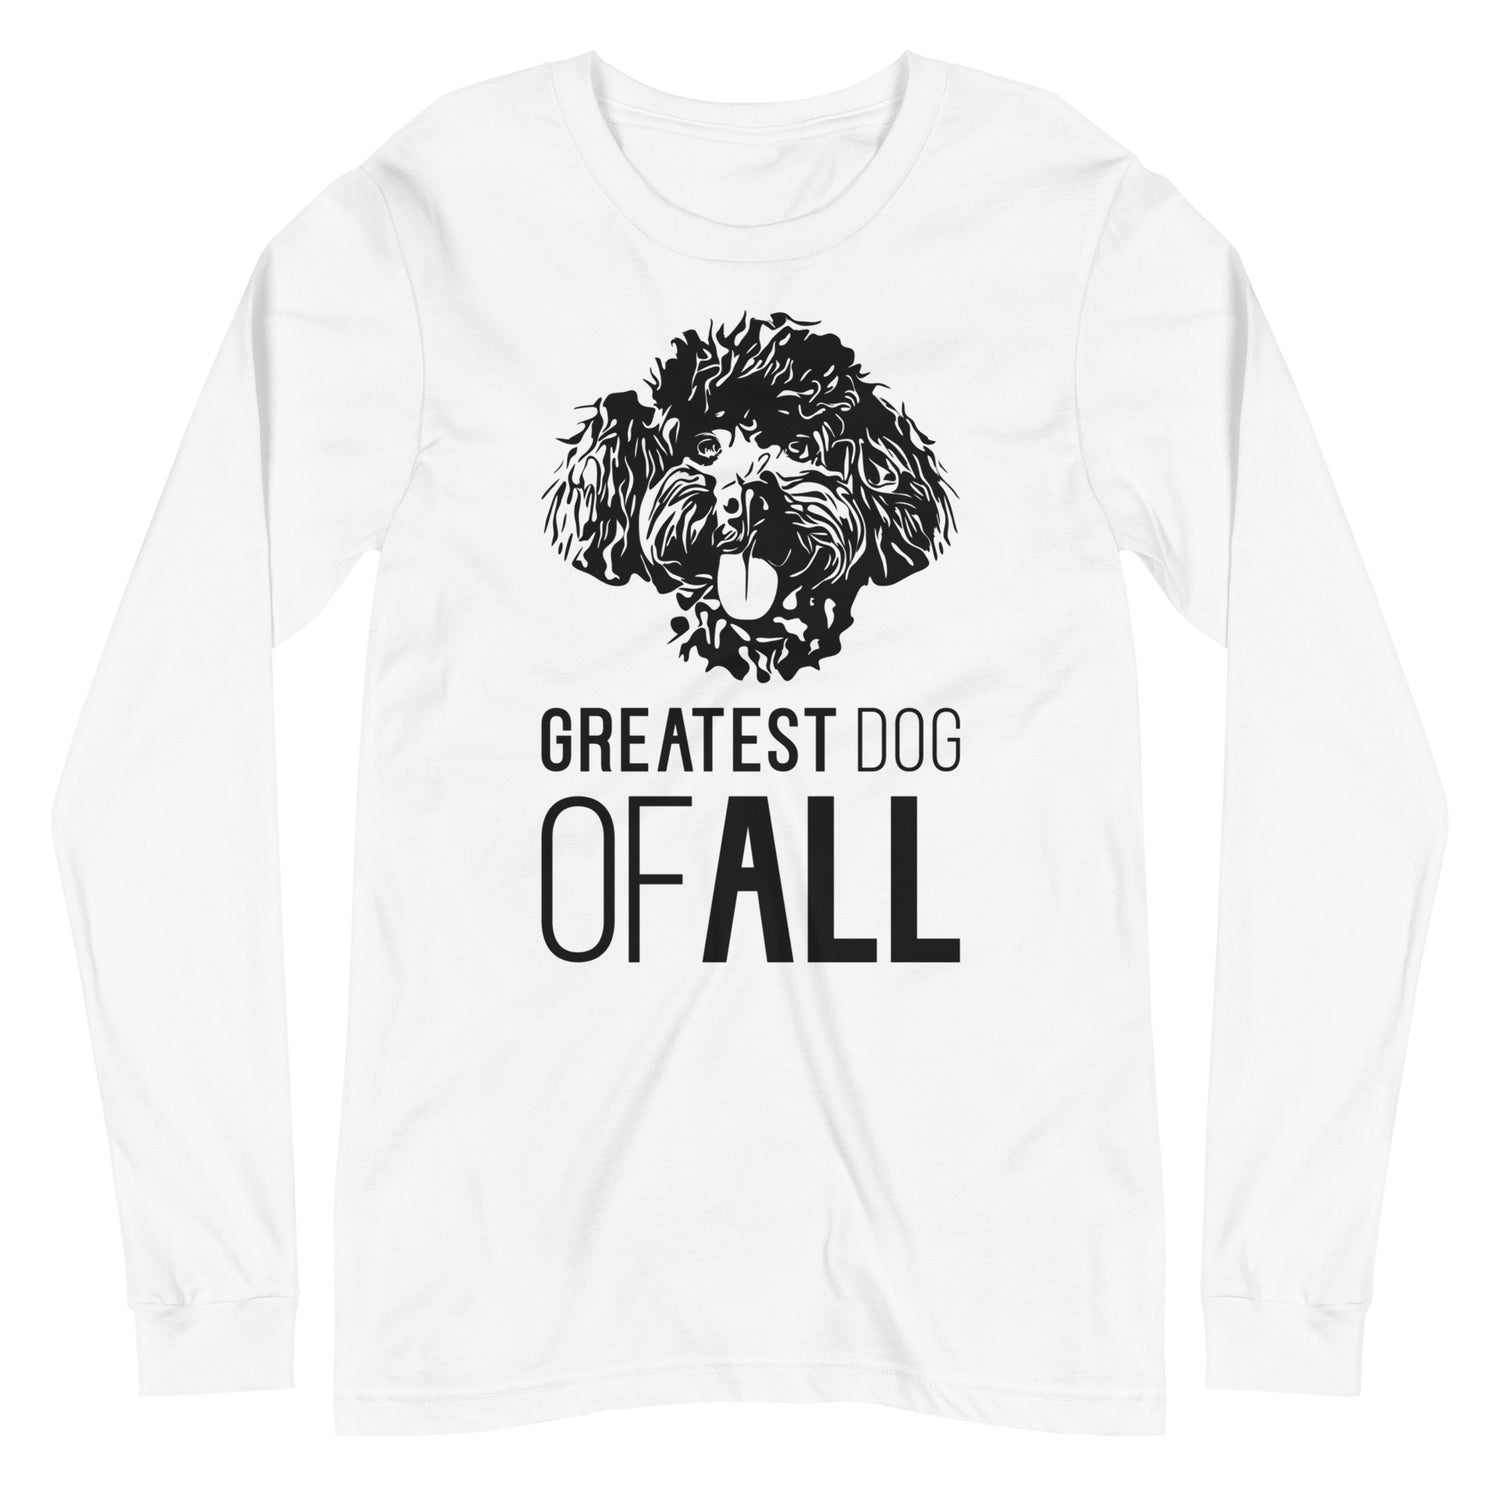 Black Toy Poodle face silhouette with Greatest Dog of All caption on unisex white long sleeve t-shirt